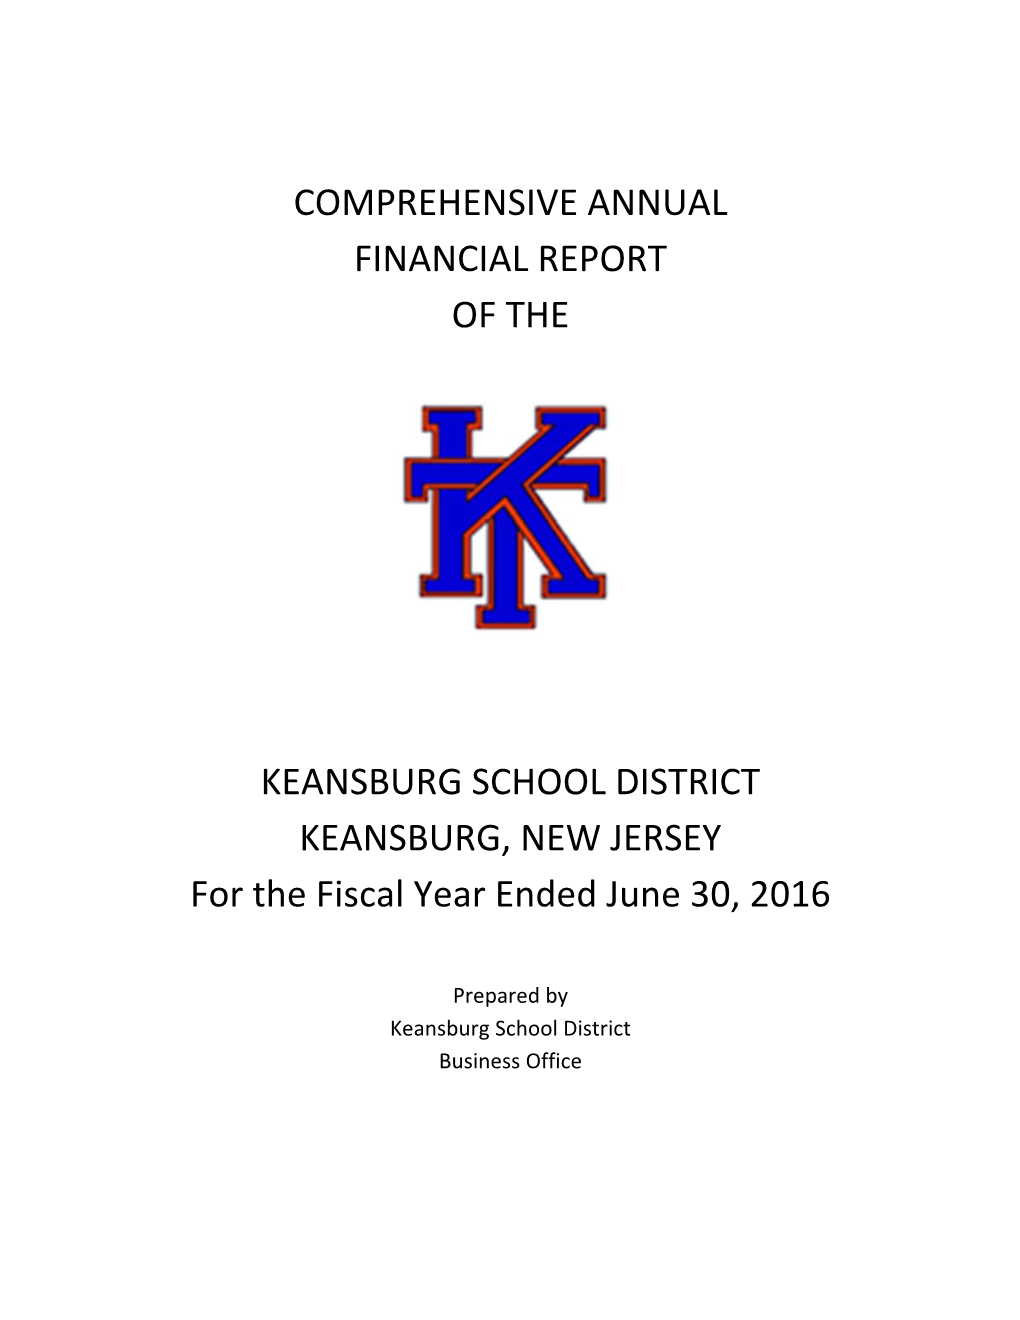 Comprehensive Annual Financial Report of The